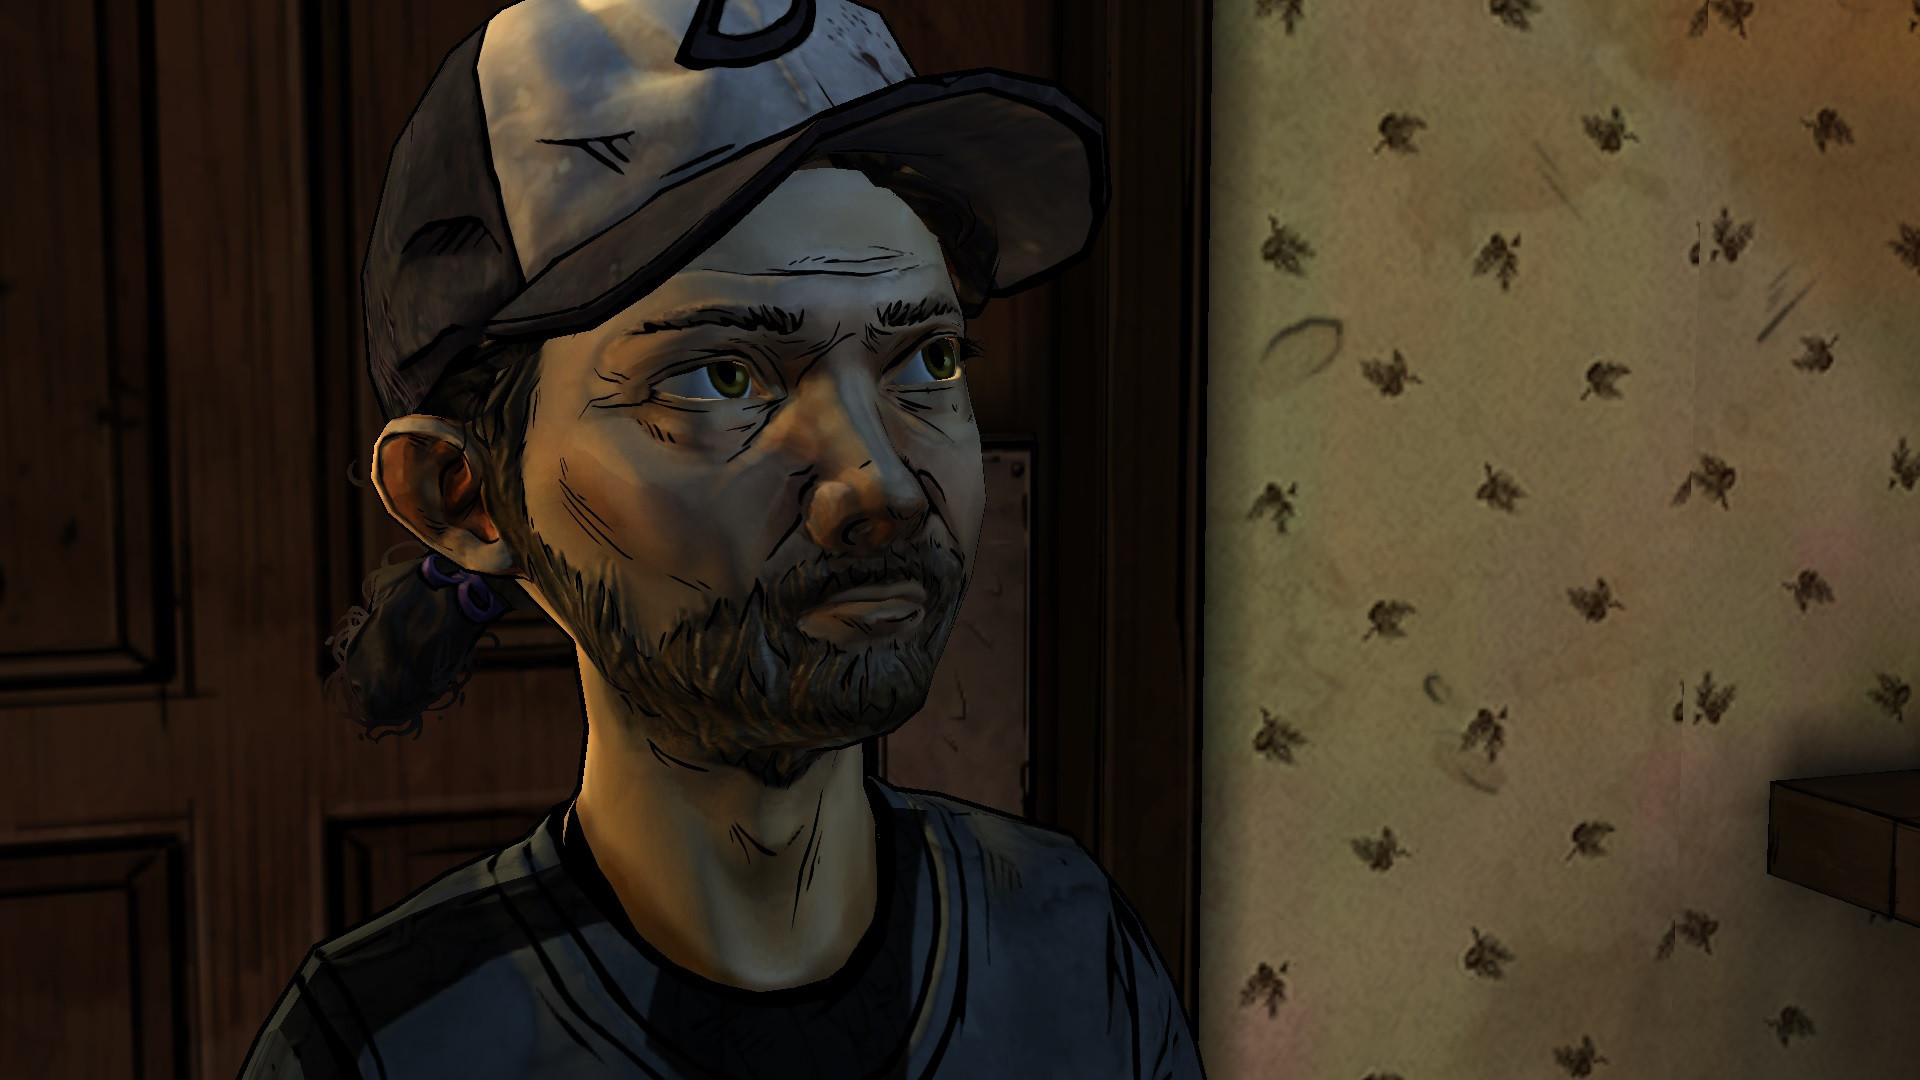 1920x1080 Found this one the walking dead wiki. Someone's been busy model swapping.